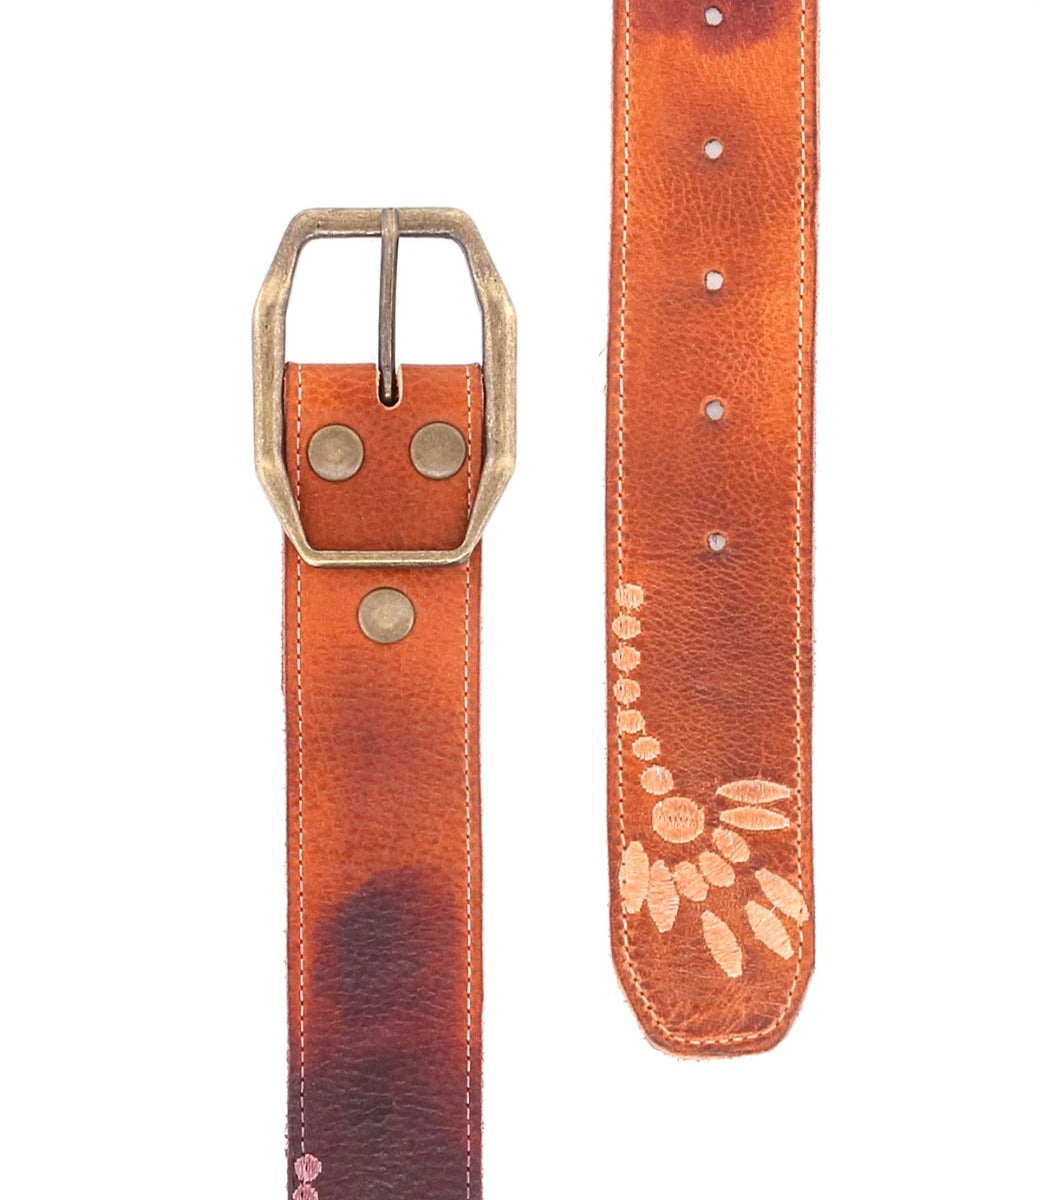 A brown leather Mohawk belt with a flower on it. (Brand: Bed Stu)